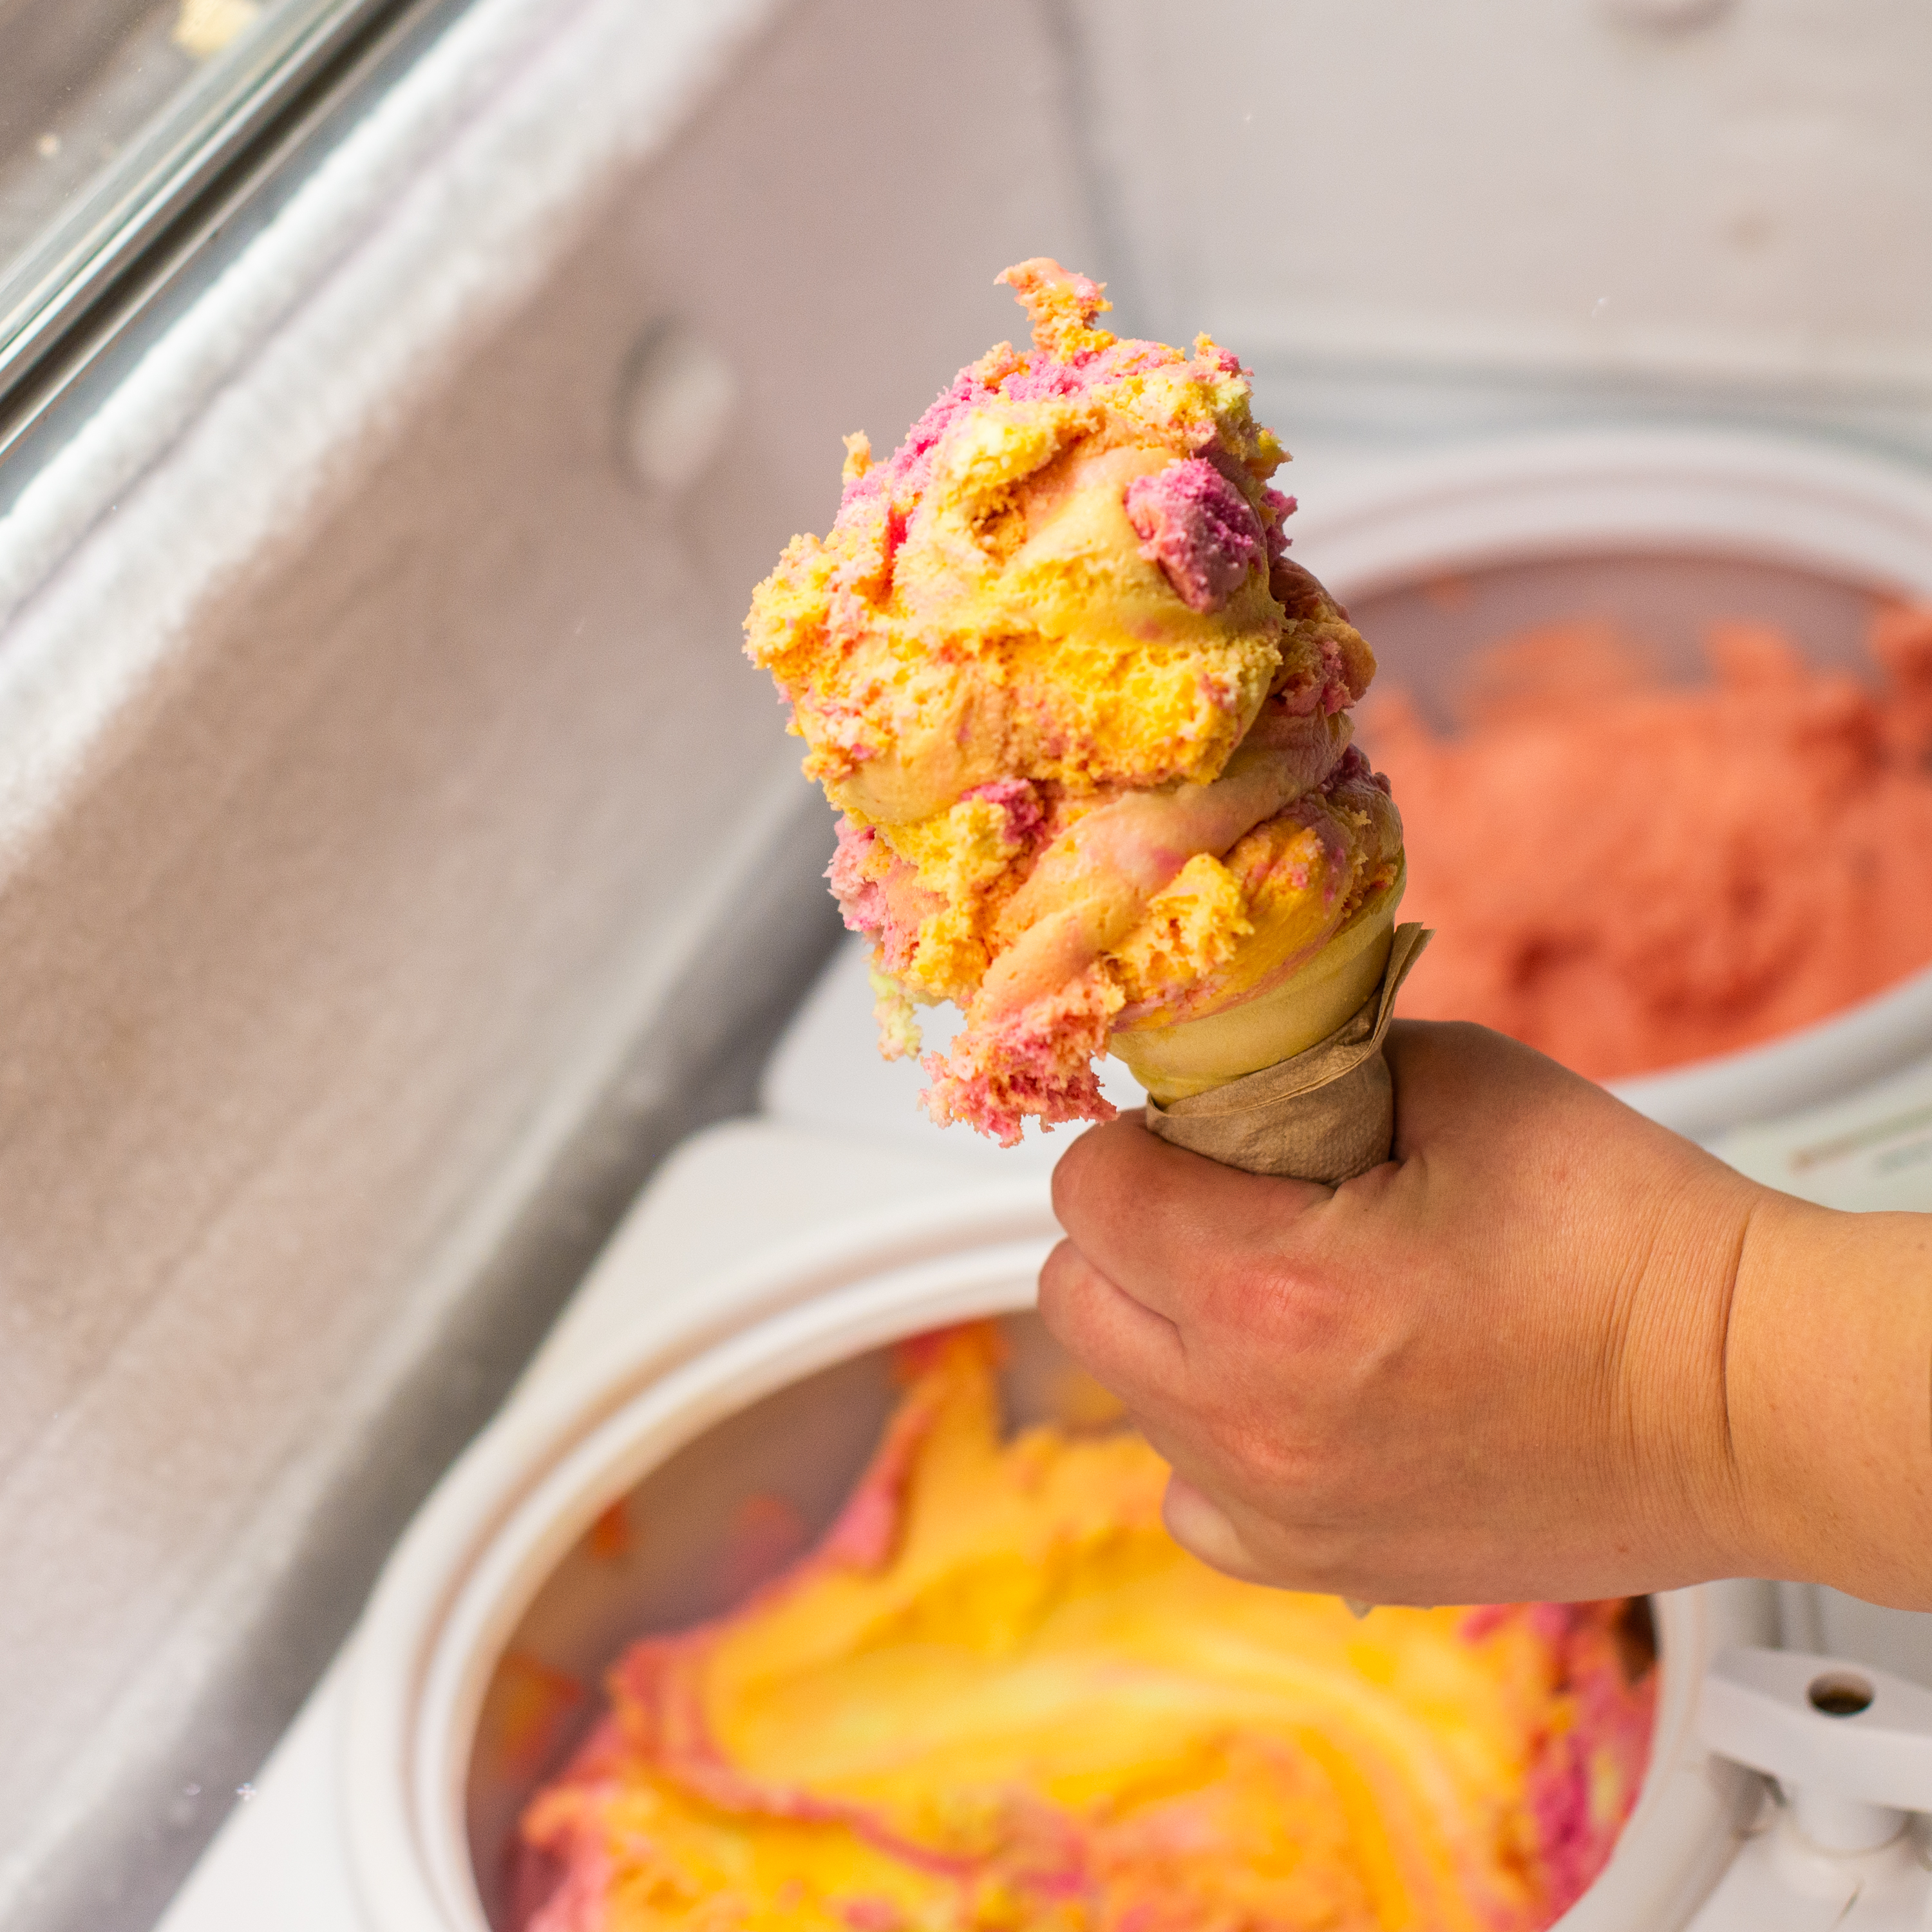 A scoop of orange and pink ice cream served at Red Barn Market